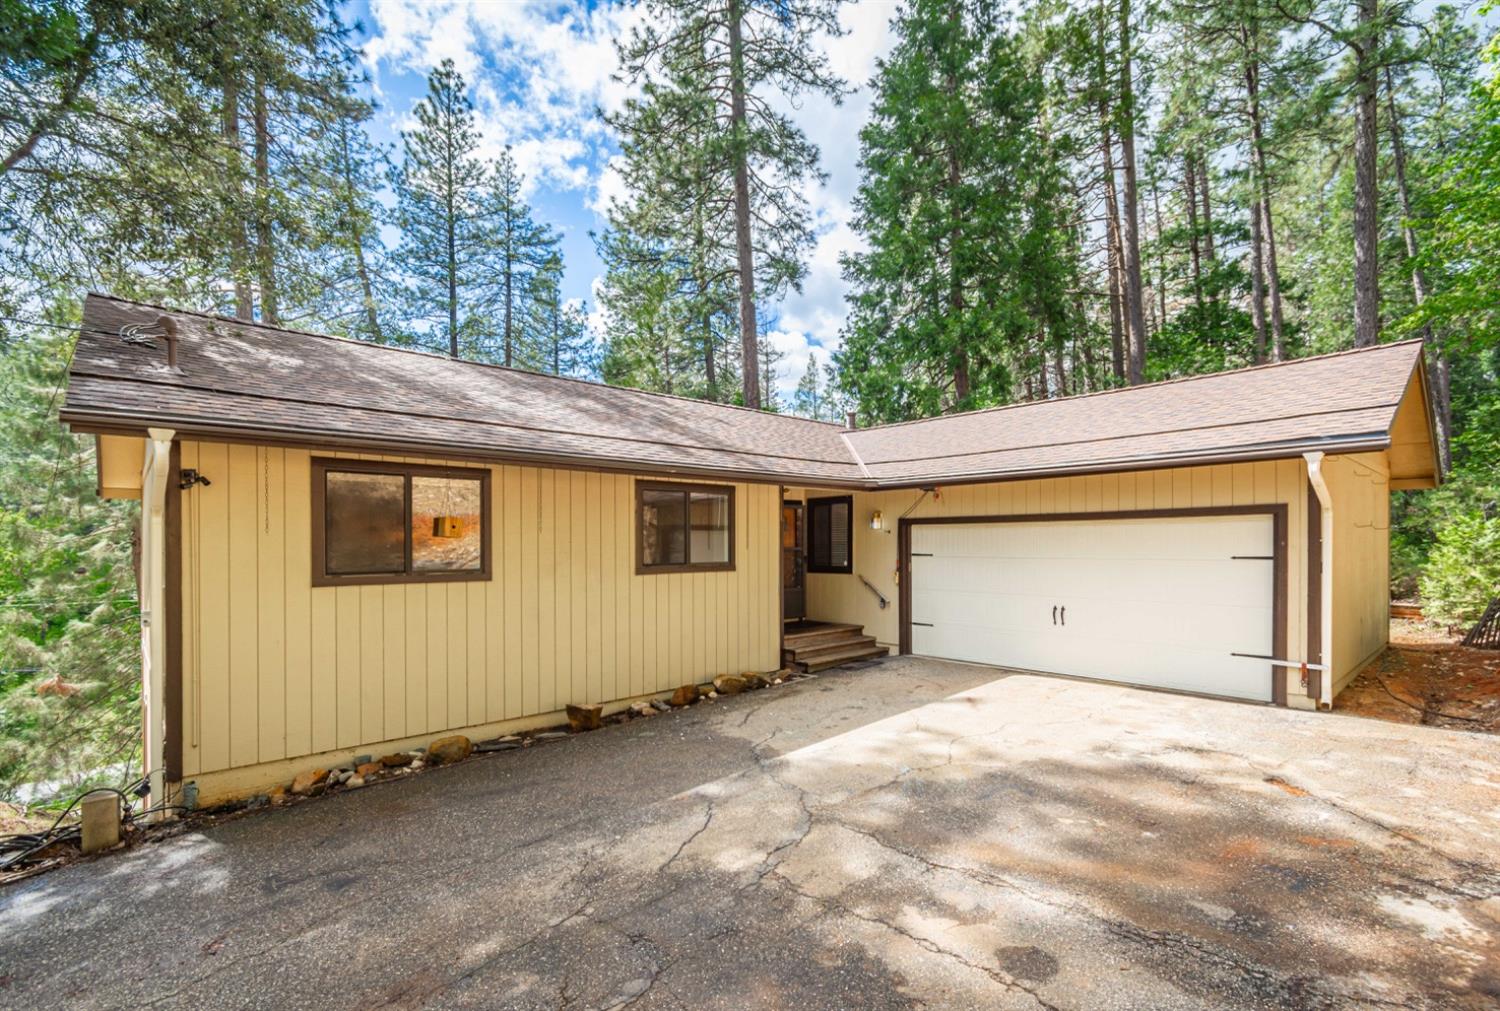 Photo of 14033 Iva Cir in Grass Valley, CA